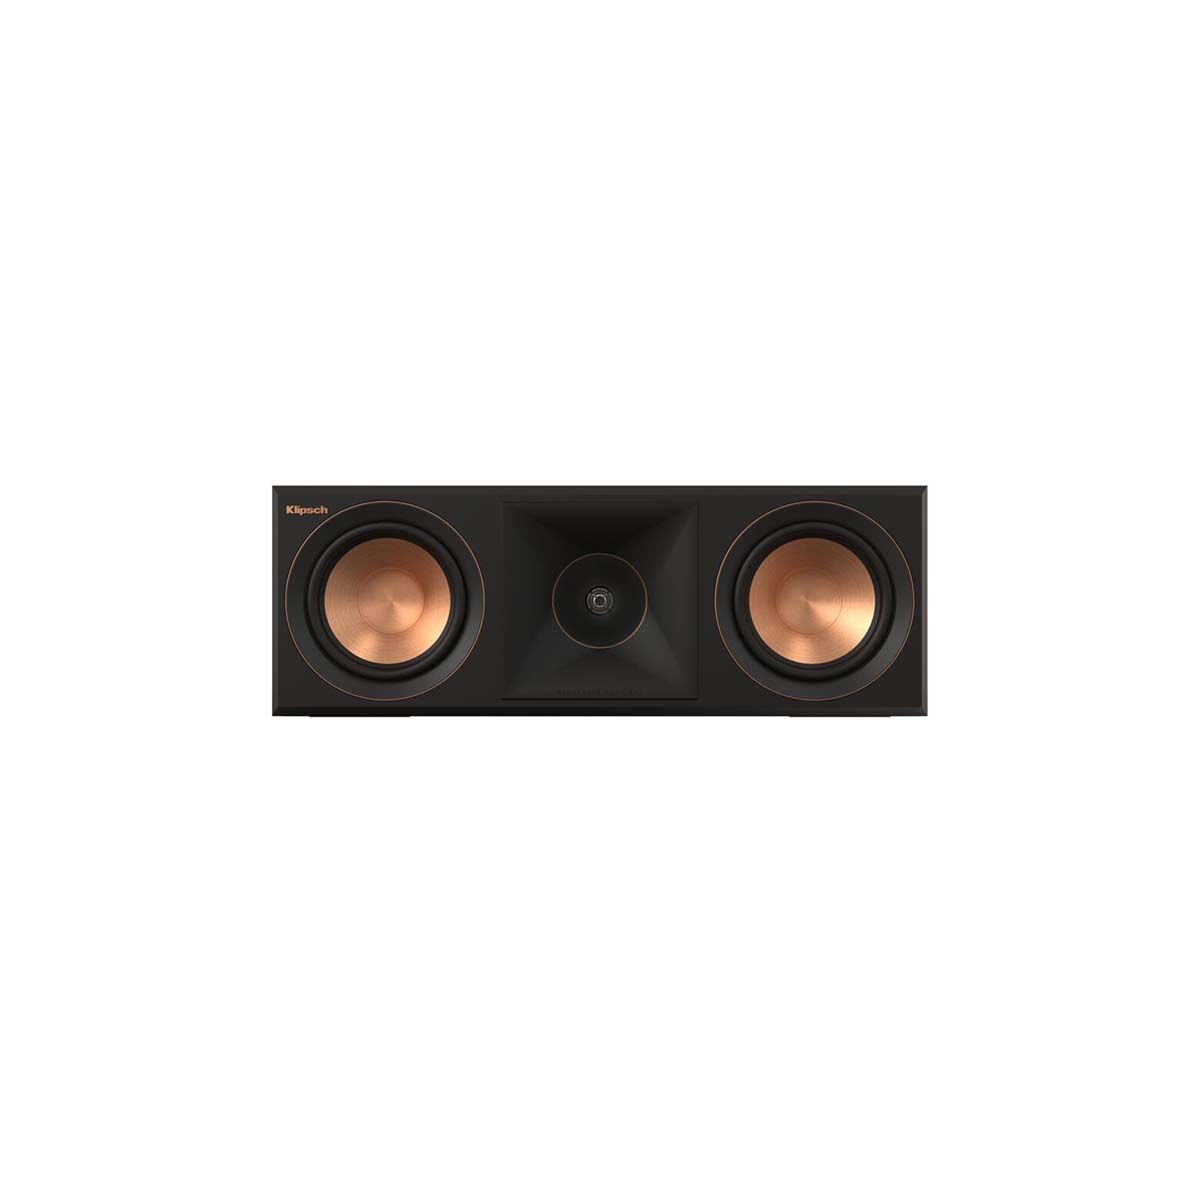 Klipsch RP-500C II Center Channel Speaker - Ebony - front view without grill